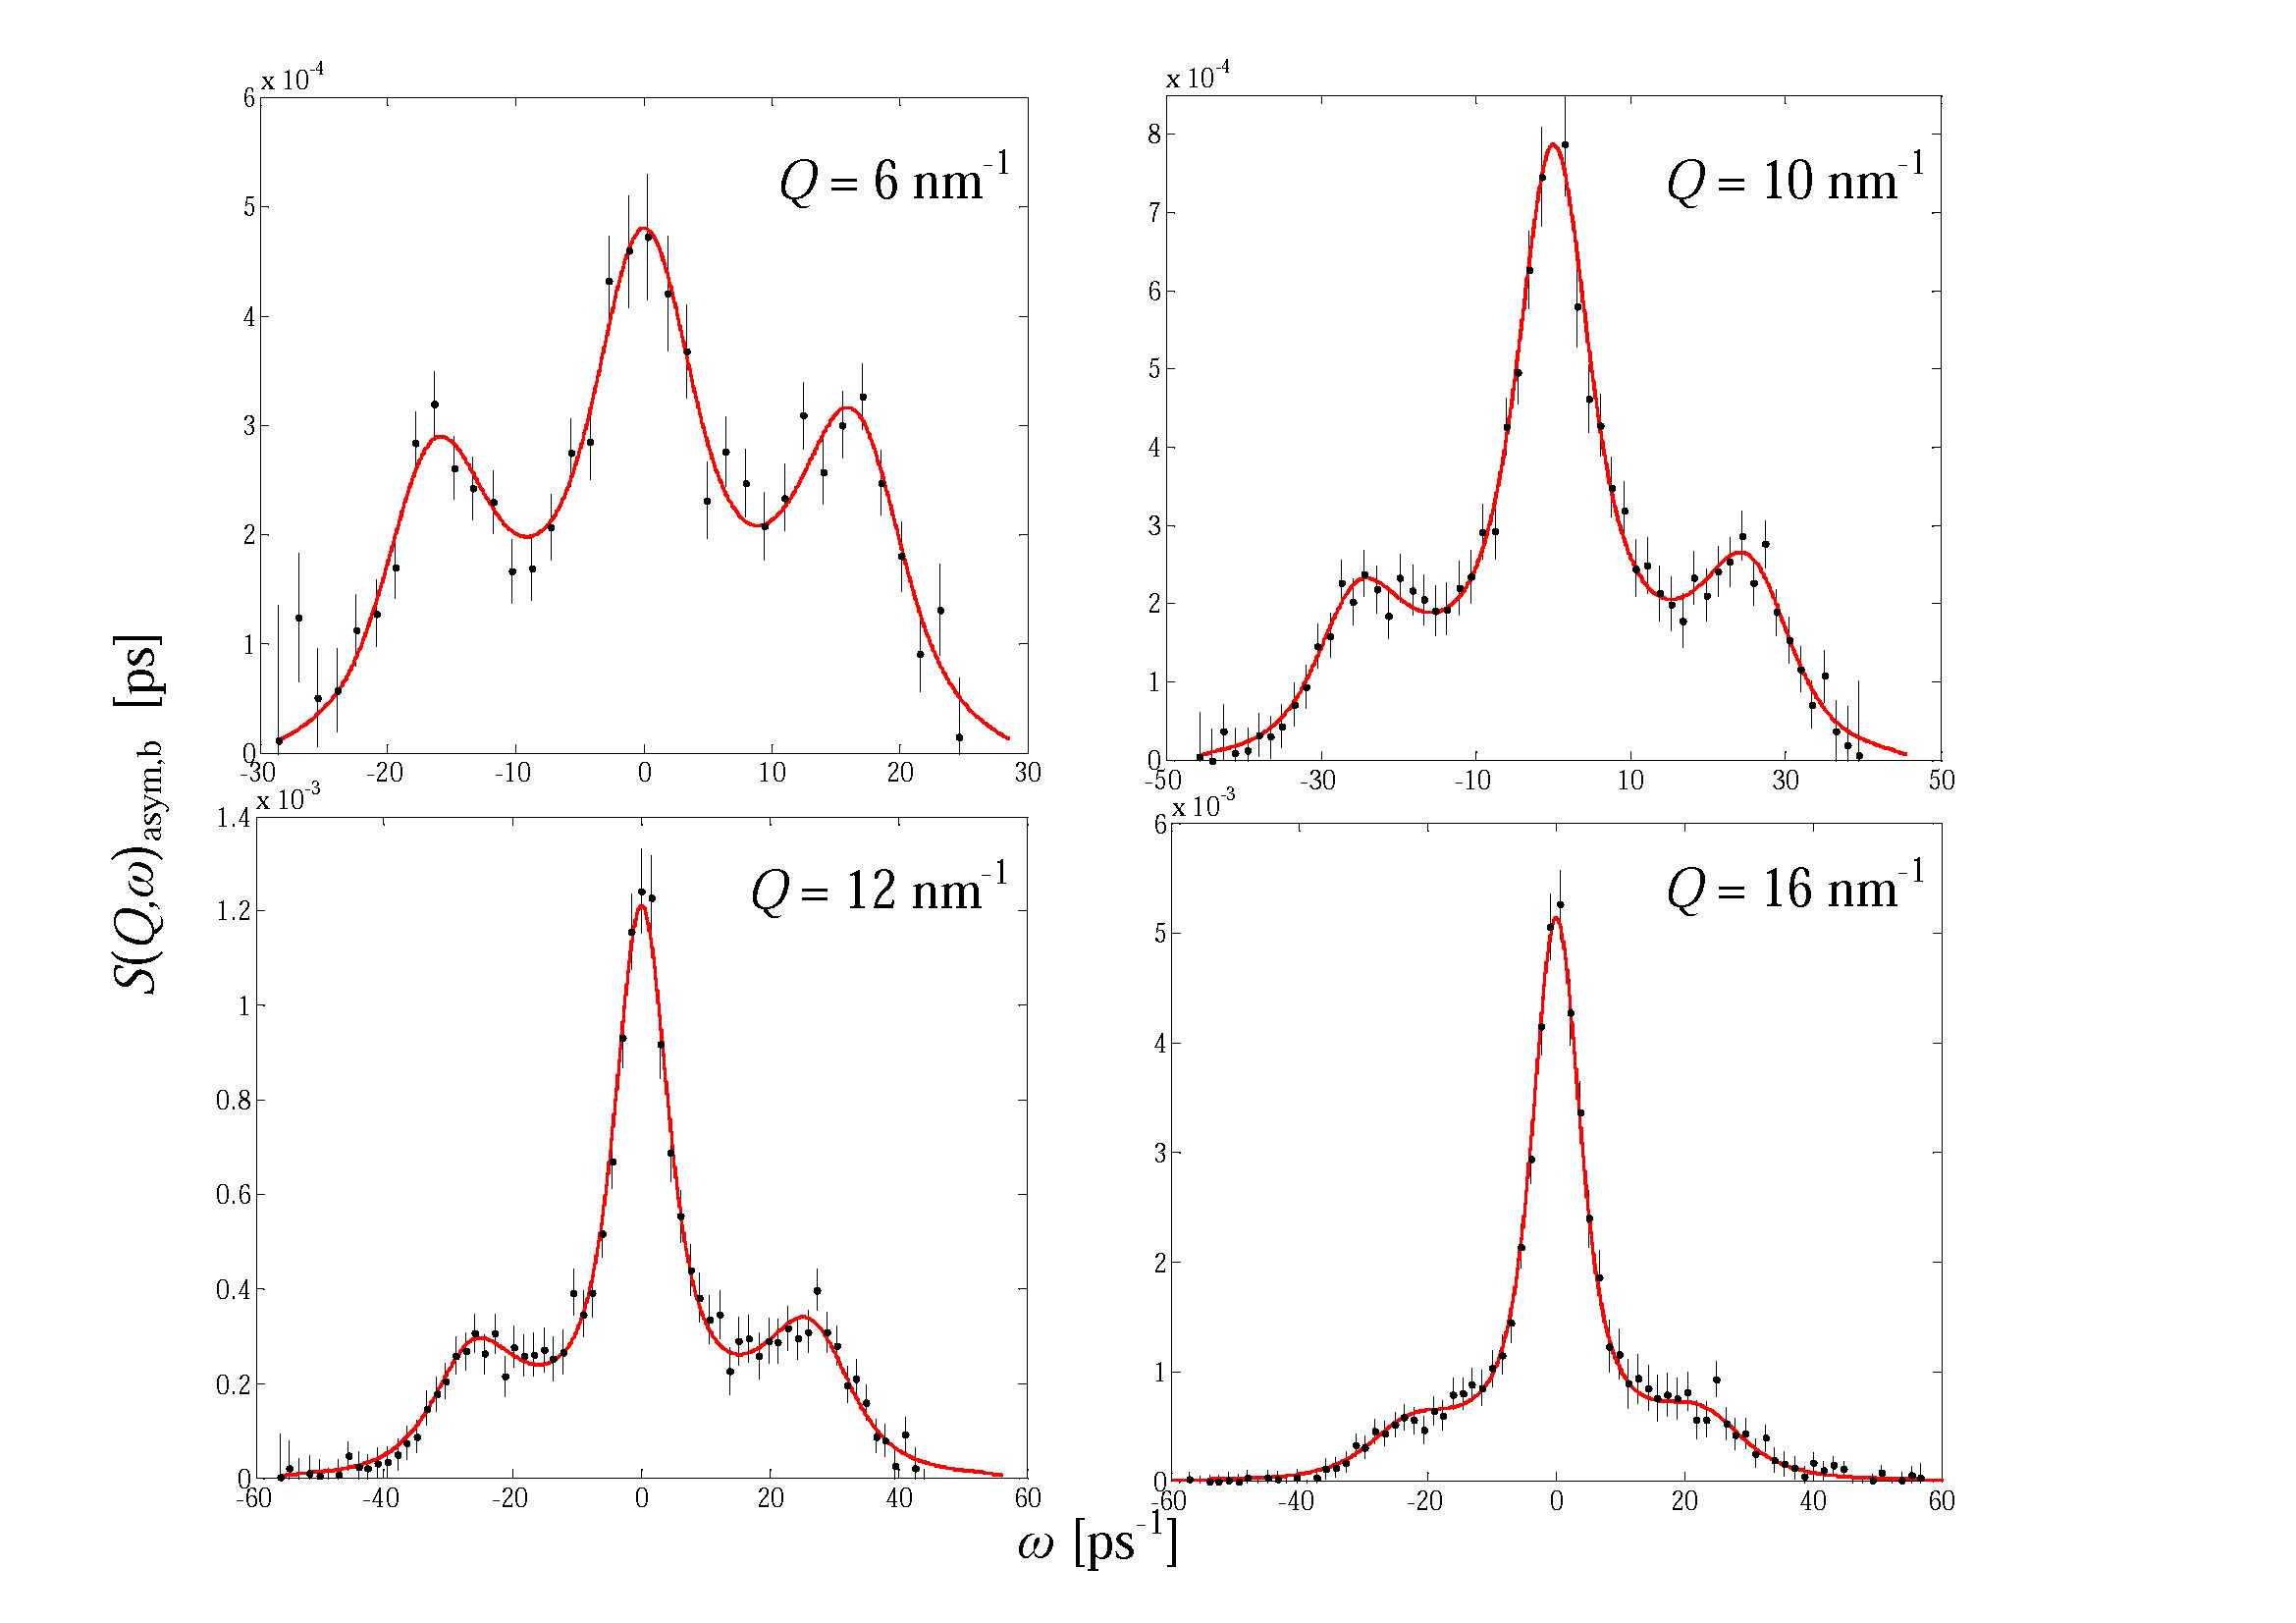 Caption Fig.1. Dynamic structure factor of gold at four Q values of the NBS experiment performed on BRISP. The experimental data (black dots) are broadened by the instrumental energy resolution. The corresponding fit by means of the Generalized Hydrodynamics model (red solid line) has been carried out taking detailed-balance asymmetry and resolution into account.